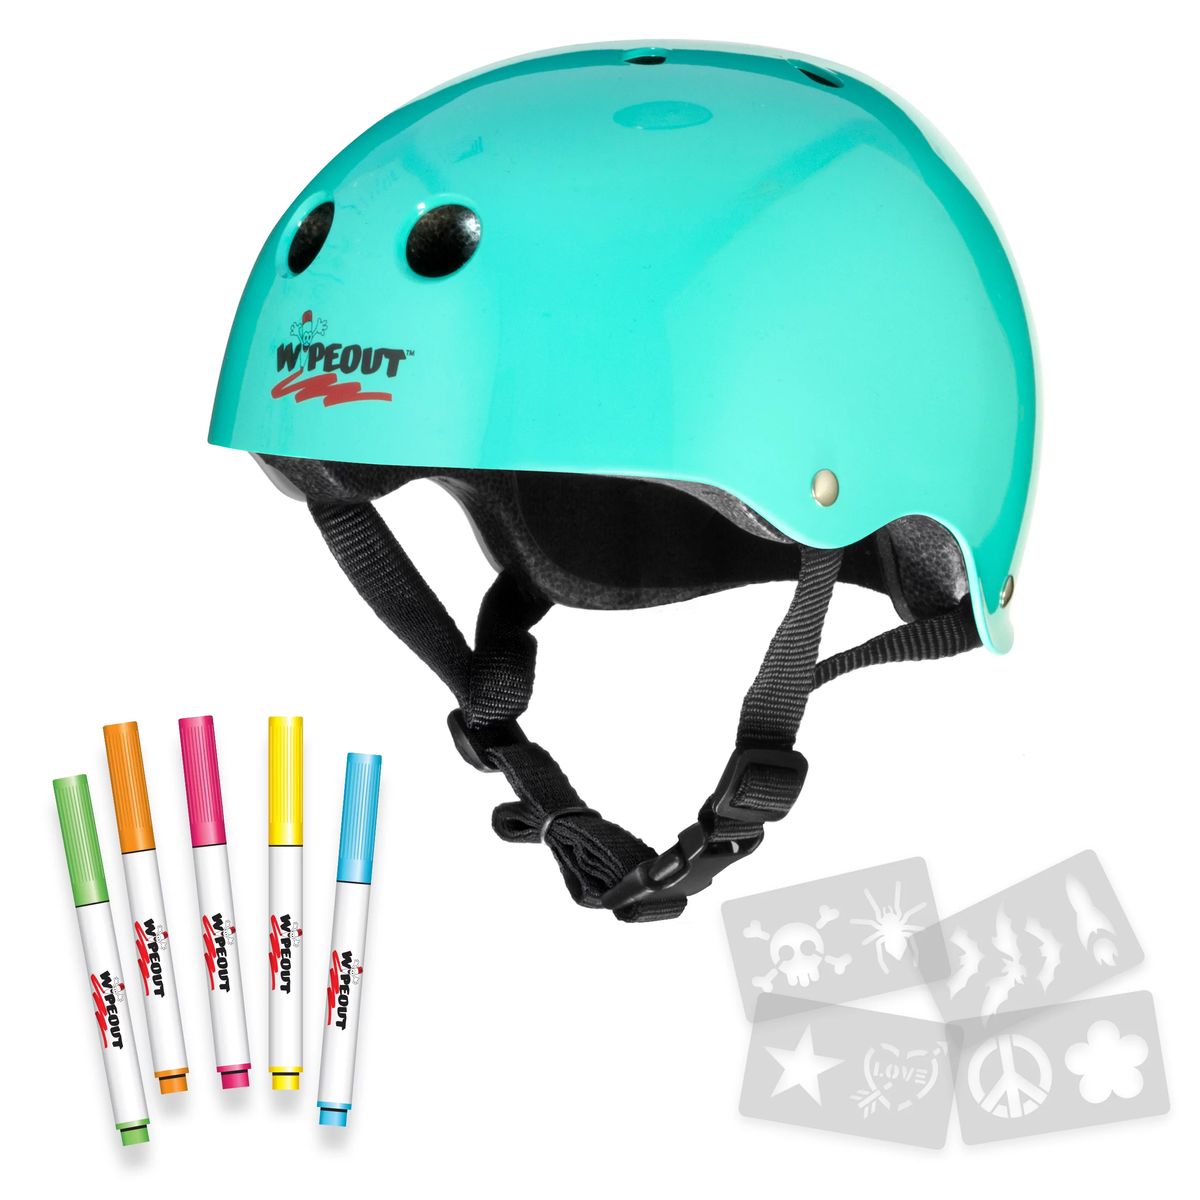 [RDY] [送料無料] Wipeout Dry Erase Kids Helmet for Bike, Skate, and Scooter, Teal Blue, Ages 5+ [楽天海外通販] | Wipeout Dry Erase Kids Helmet for Bike, Skate, and Scooter, Teal Blue, Ages 5+